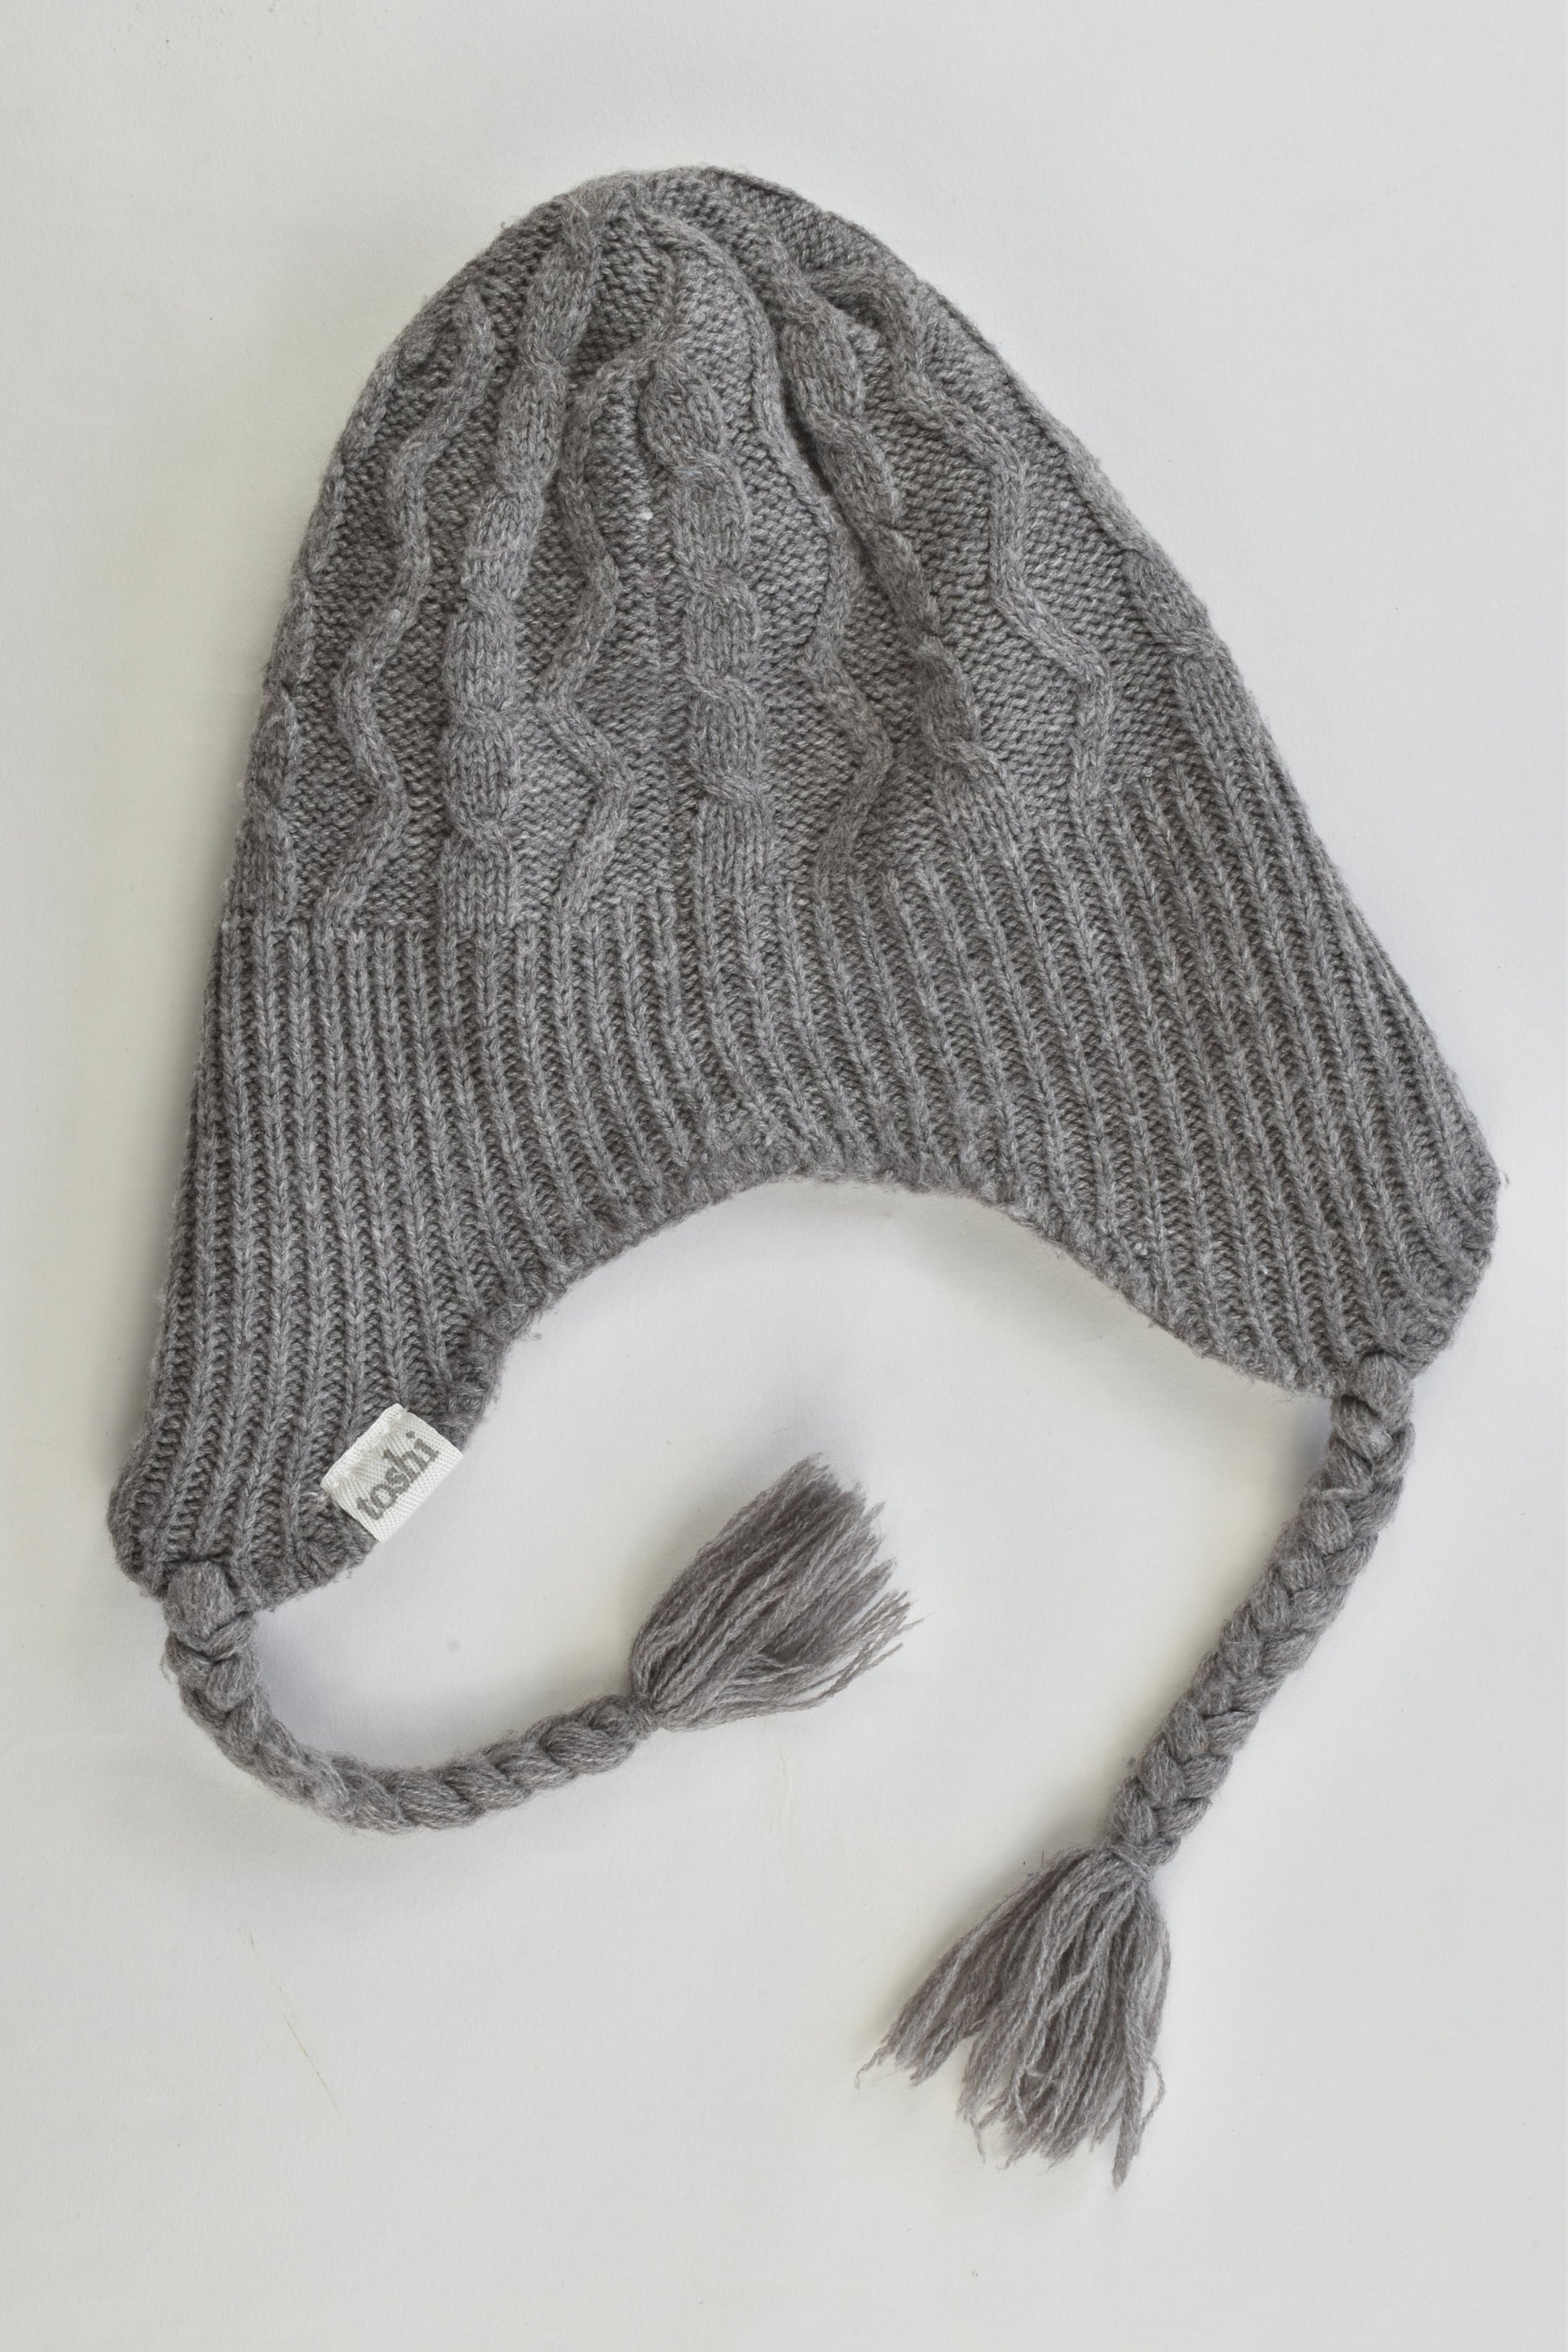 Toshi Size S (8 months to 2 years) Lined Winter Beanie